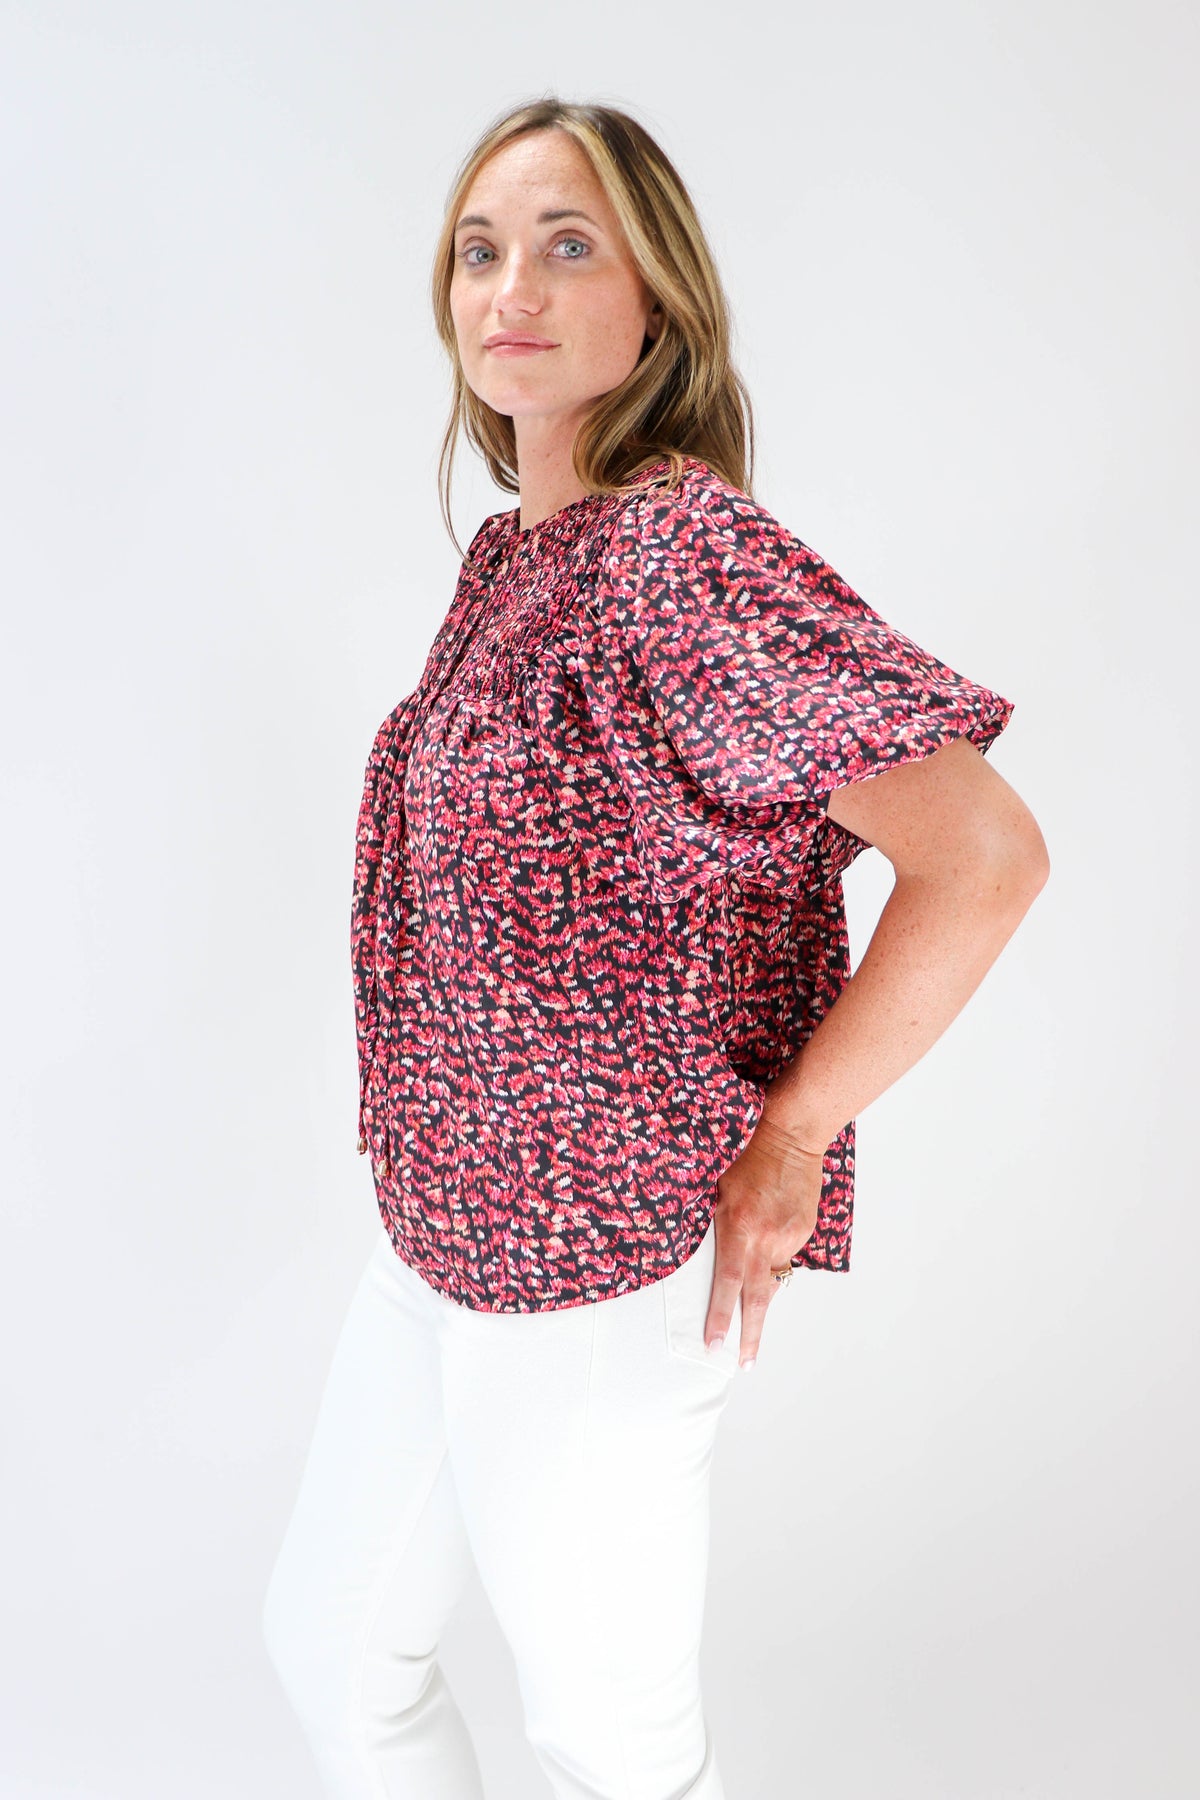 Entro | Tops for Women | Sweetest Stitch Online Boutique for Women